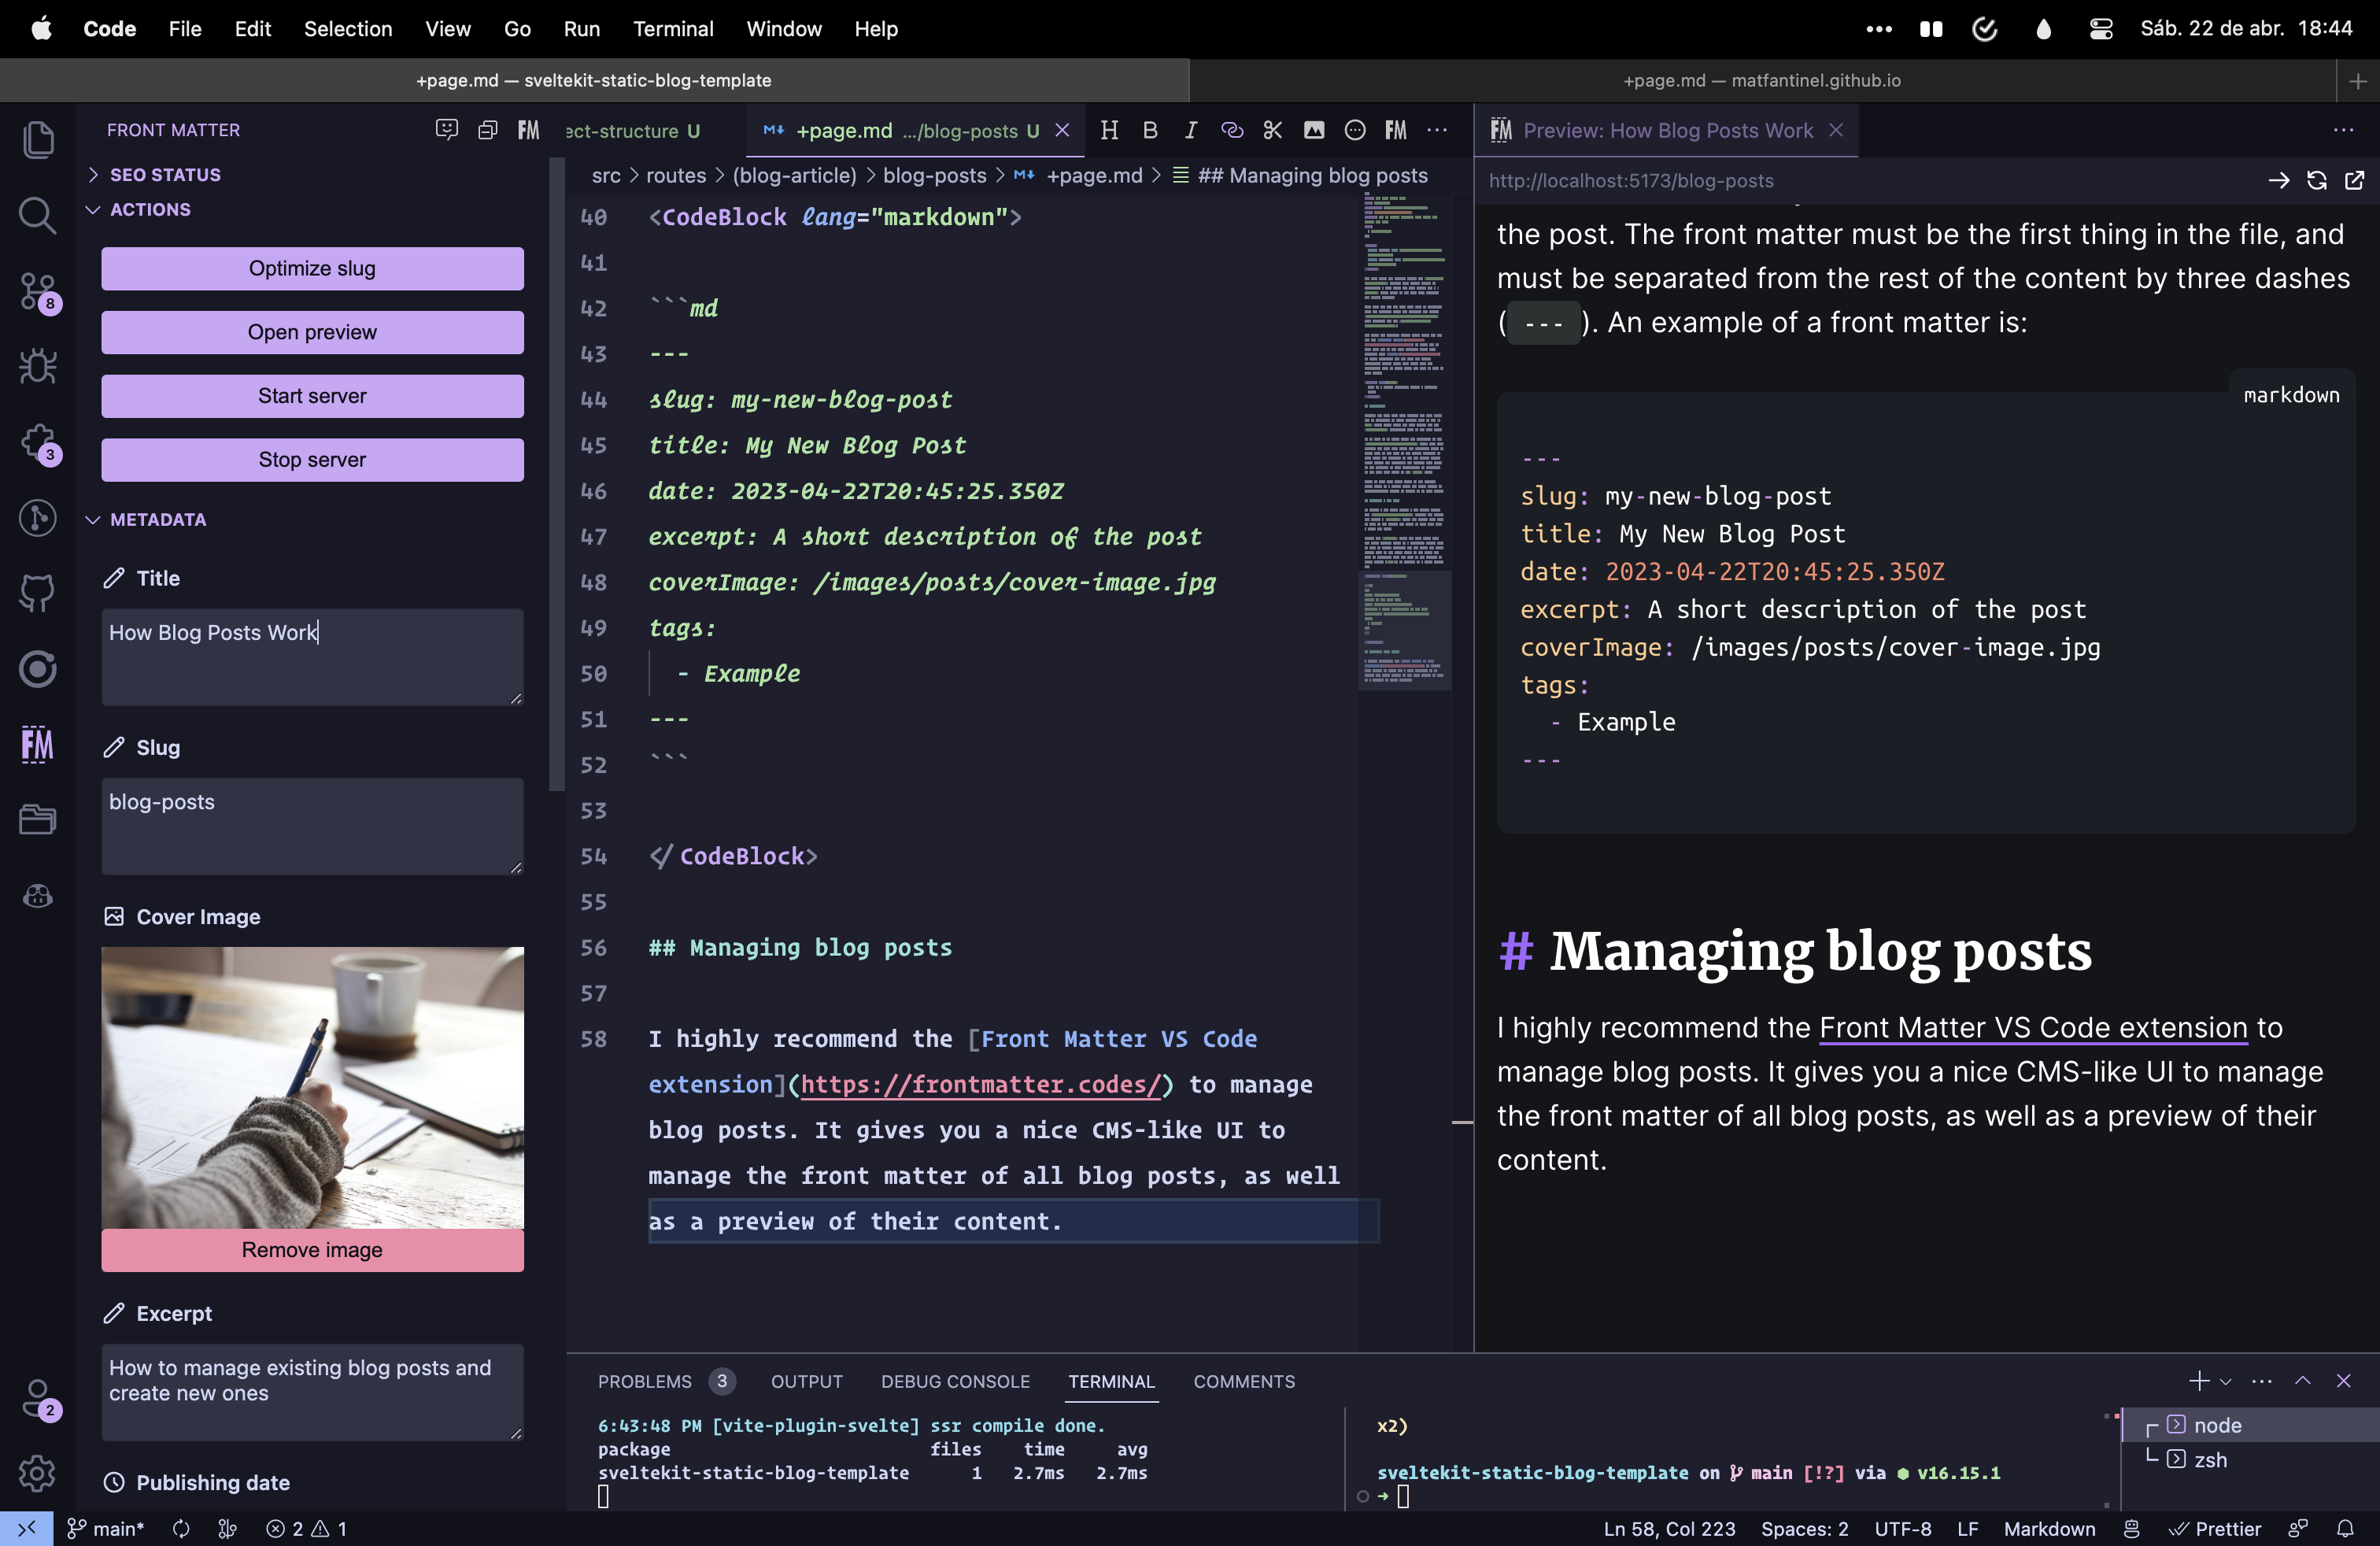 Screenshot of the Front Matter VS Code extension, showing the post editing UI